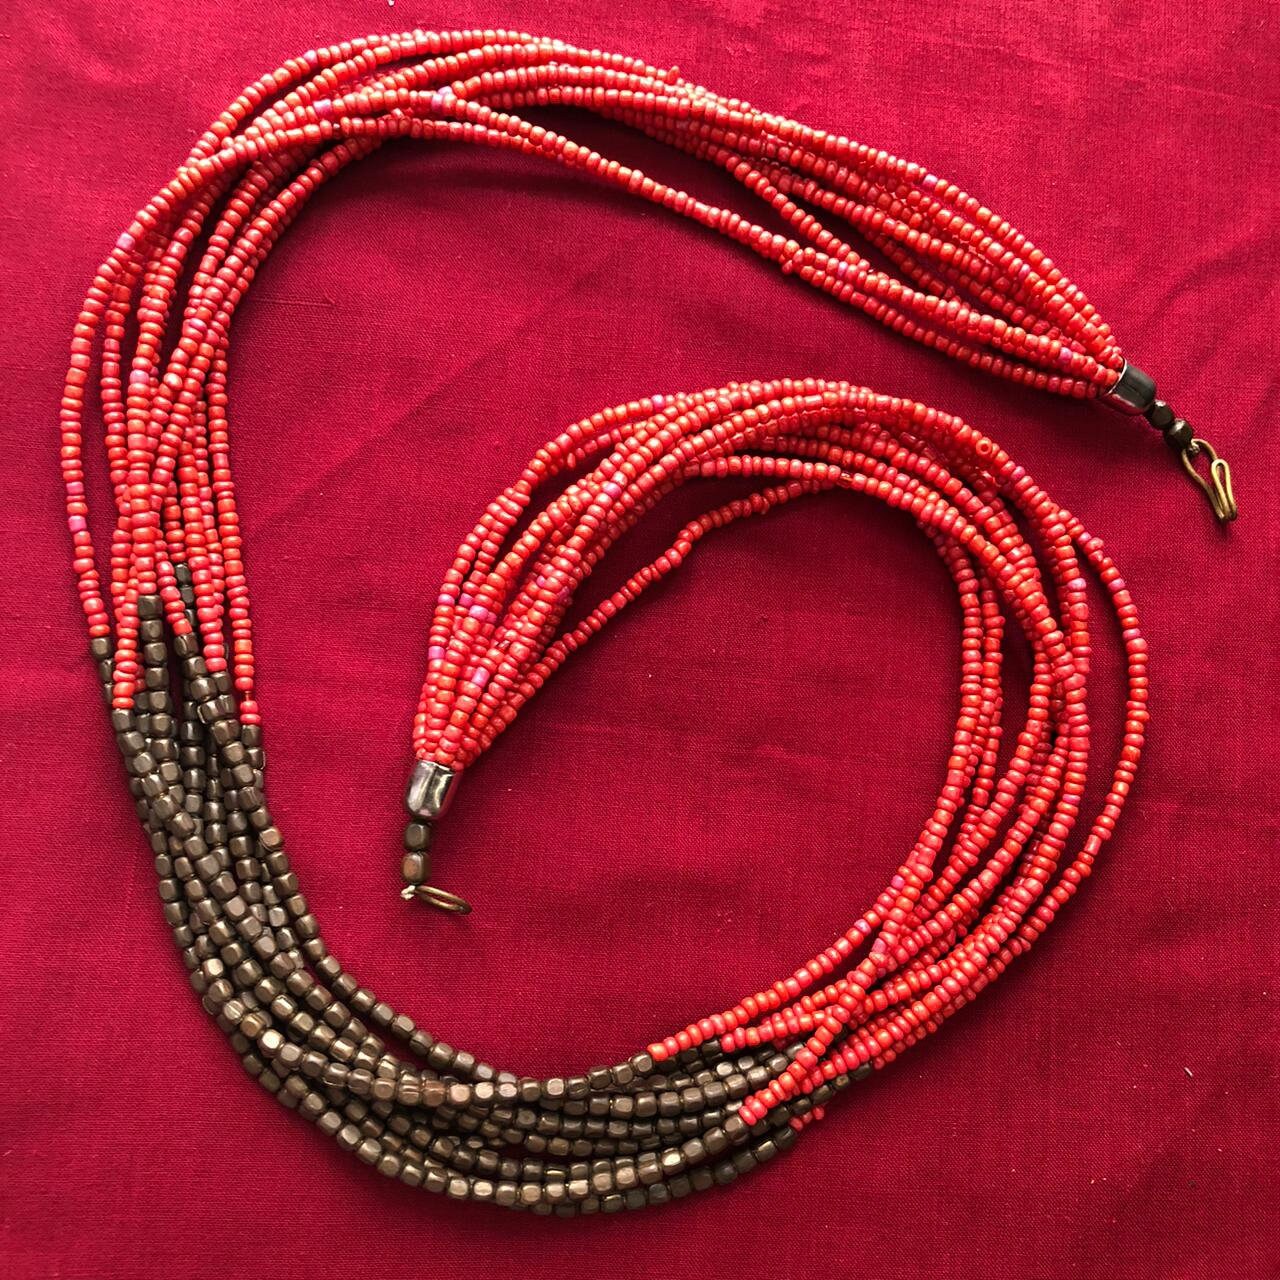 Azba Peacock Antique Black Beads Necklace Red